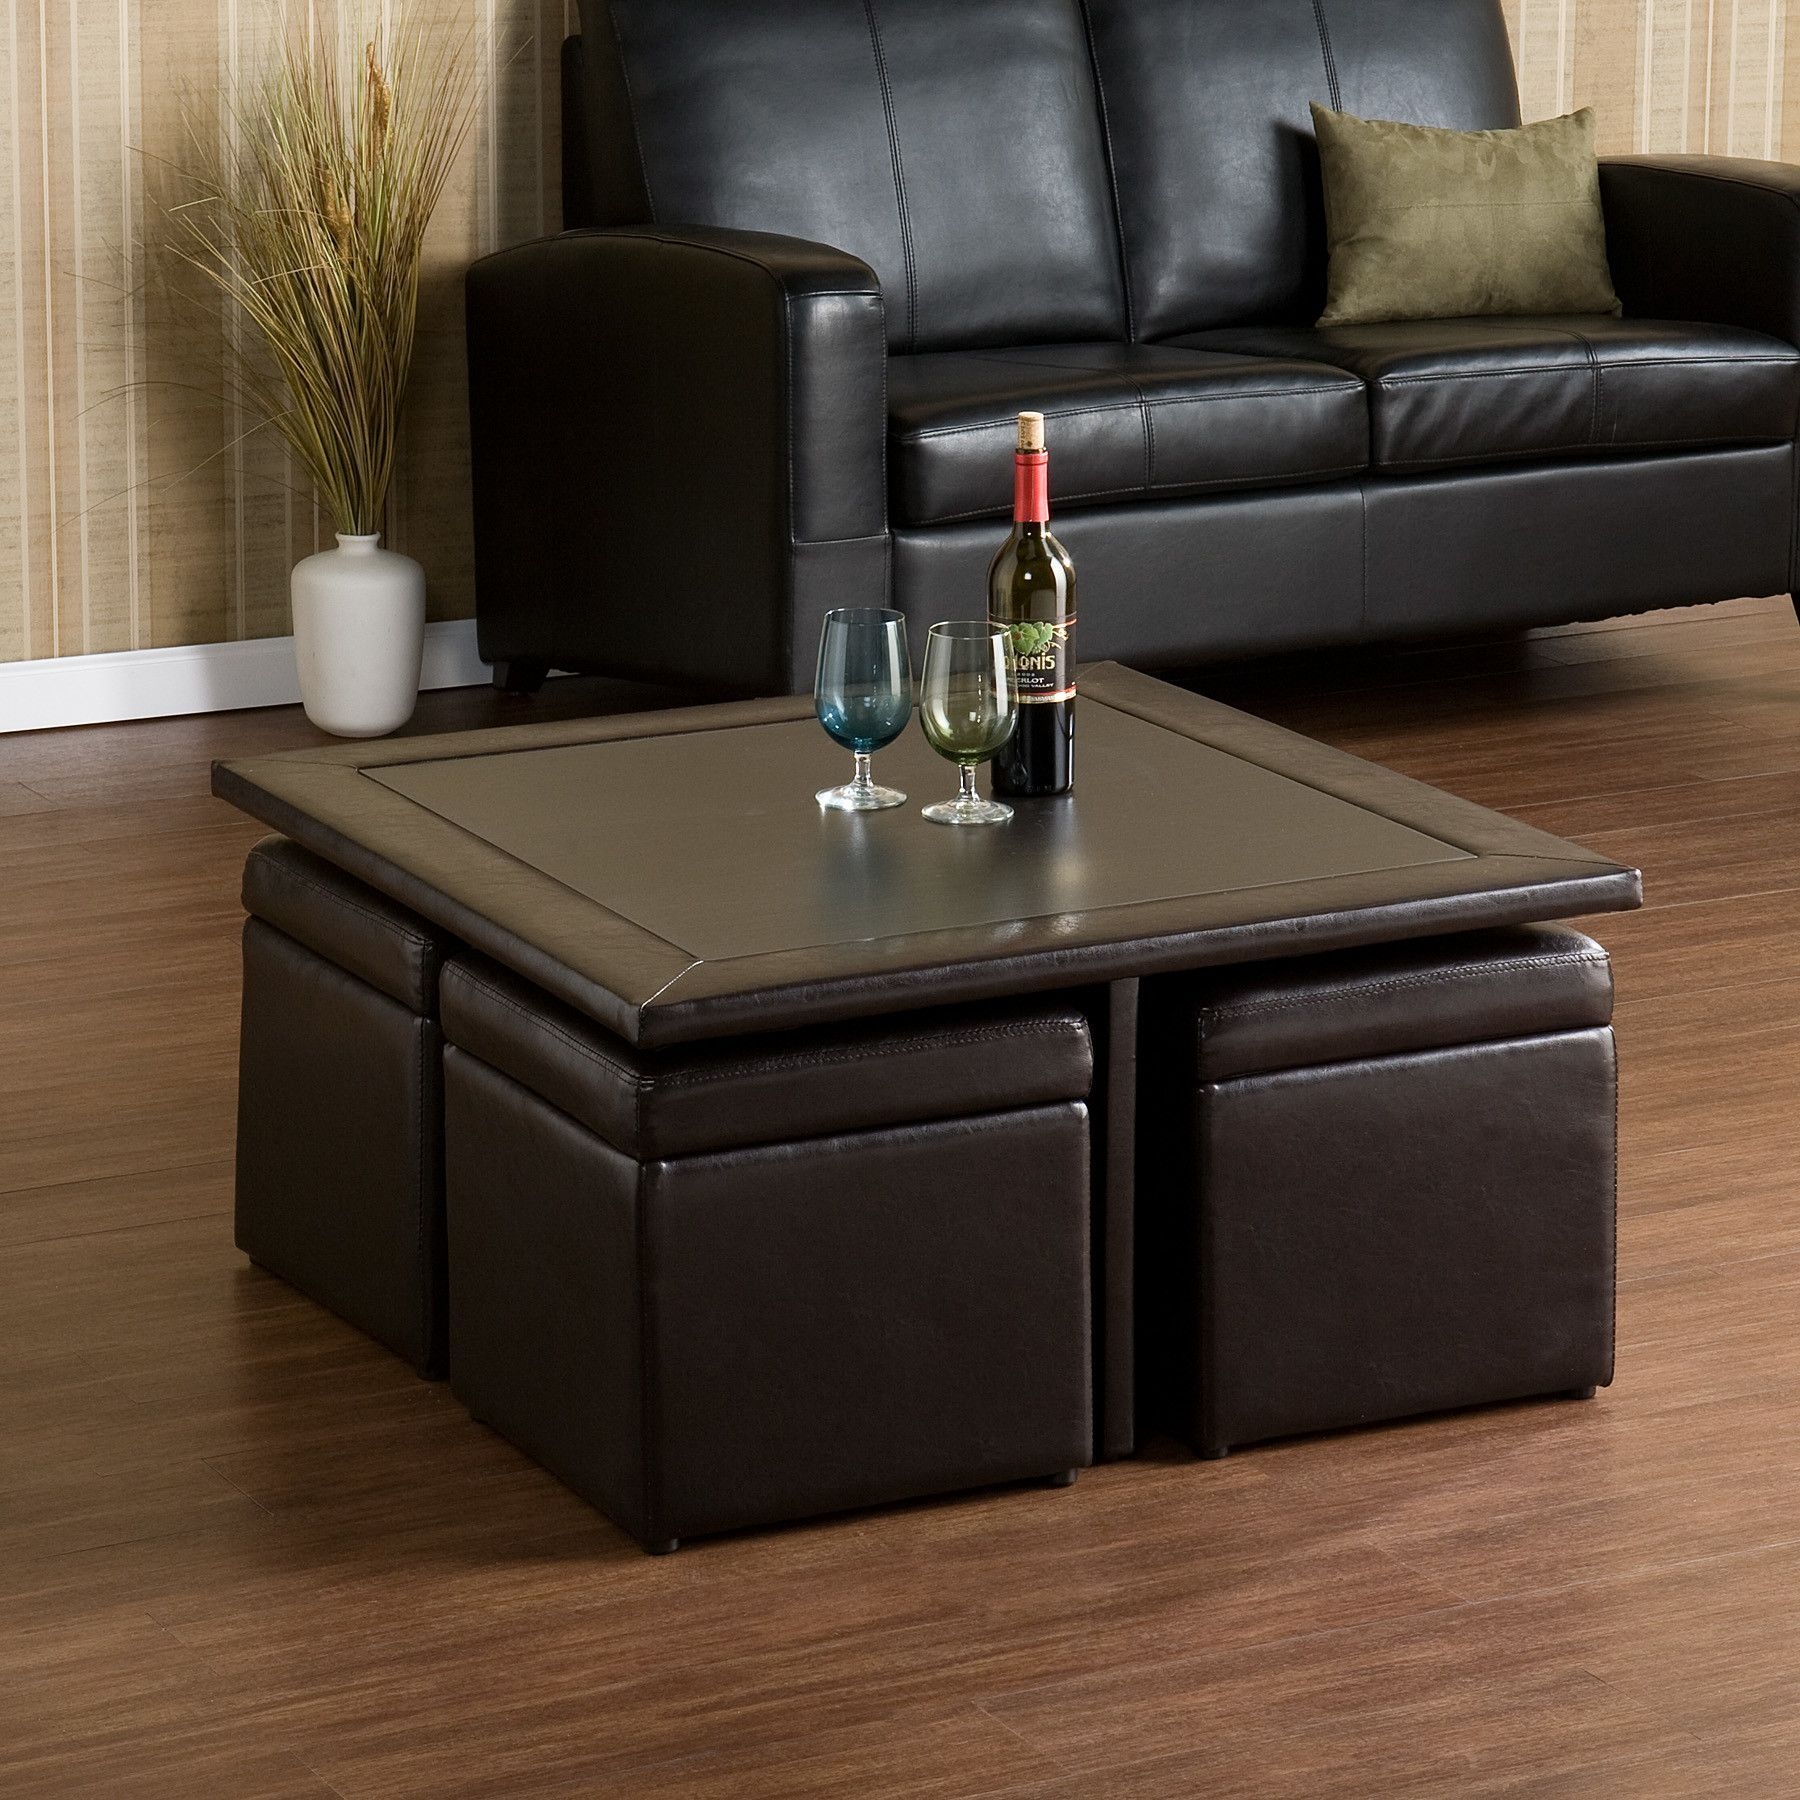 Leather coffee tables with storage